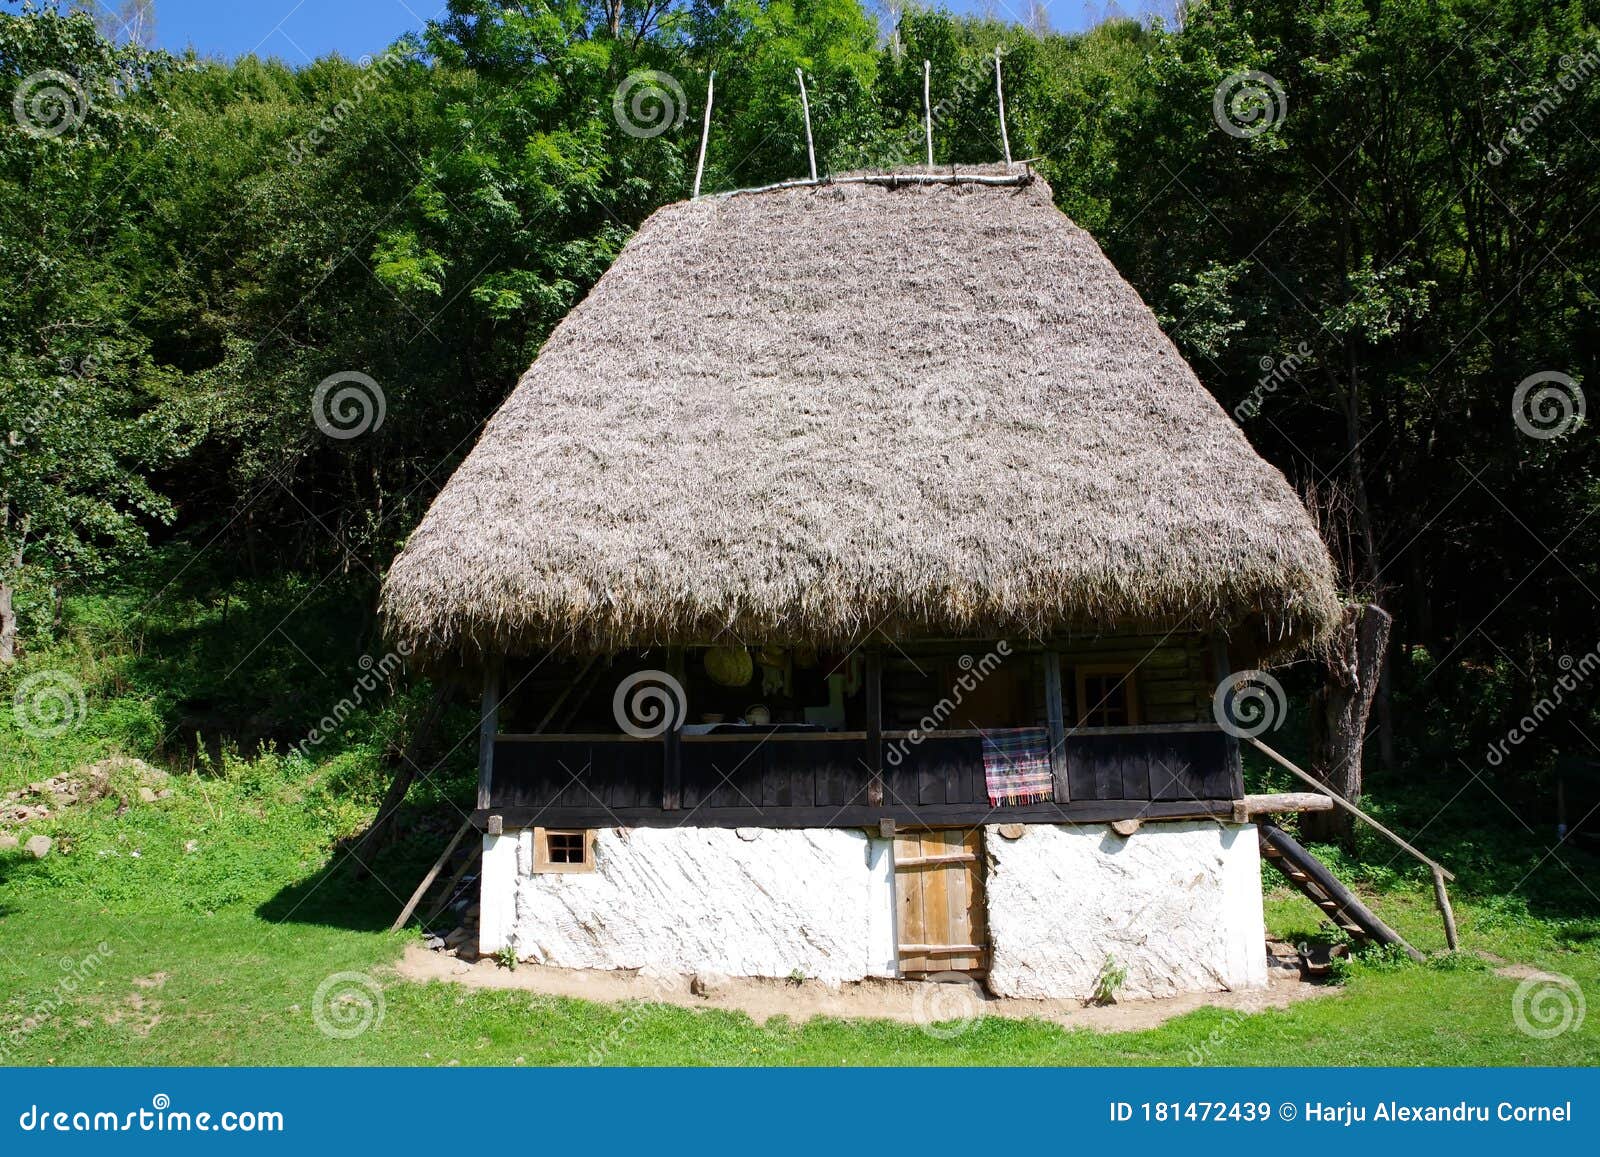 traditional house in apuseni mountains.